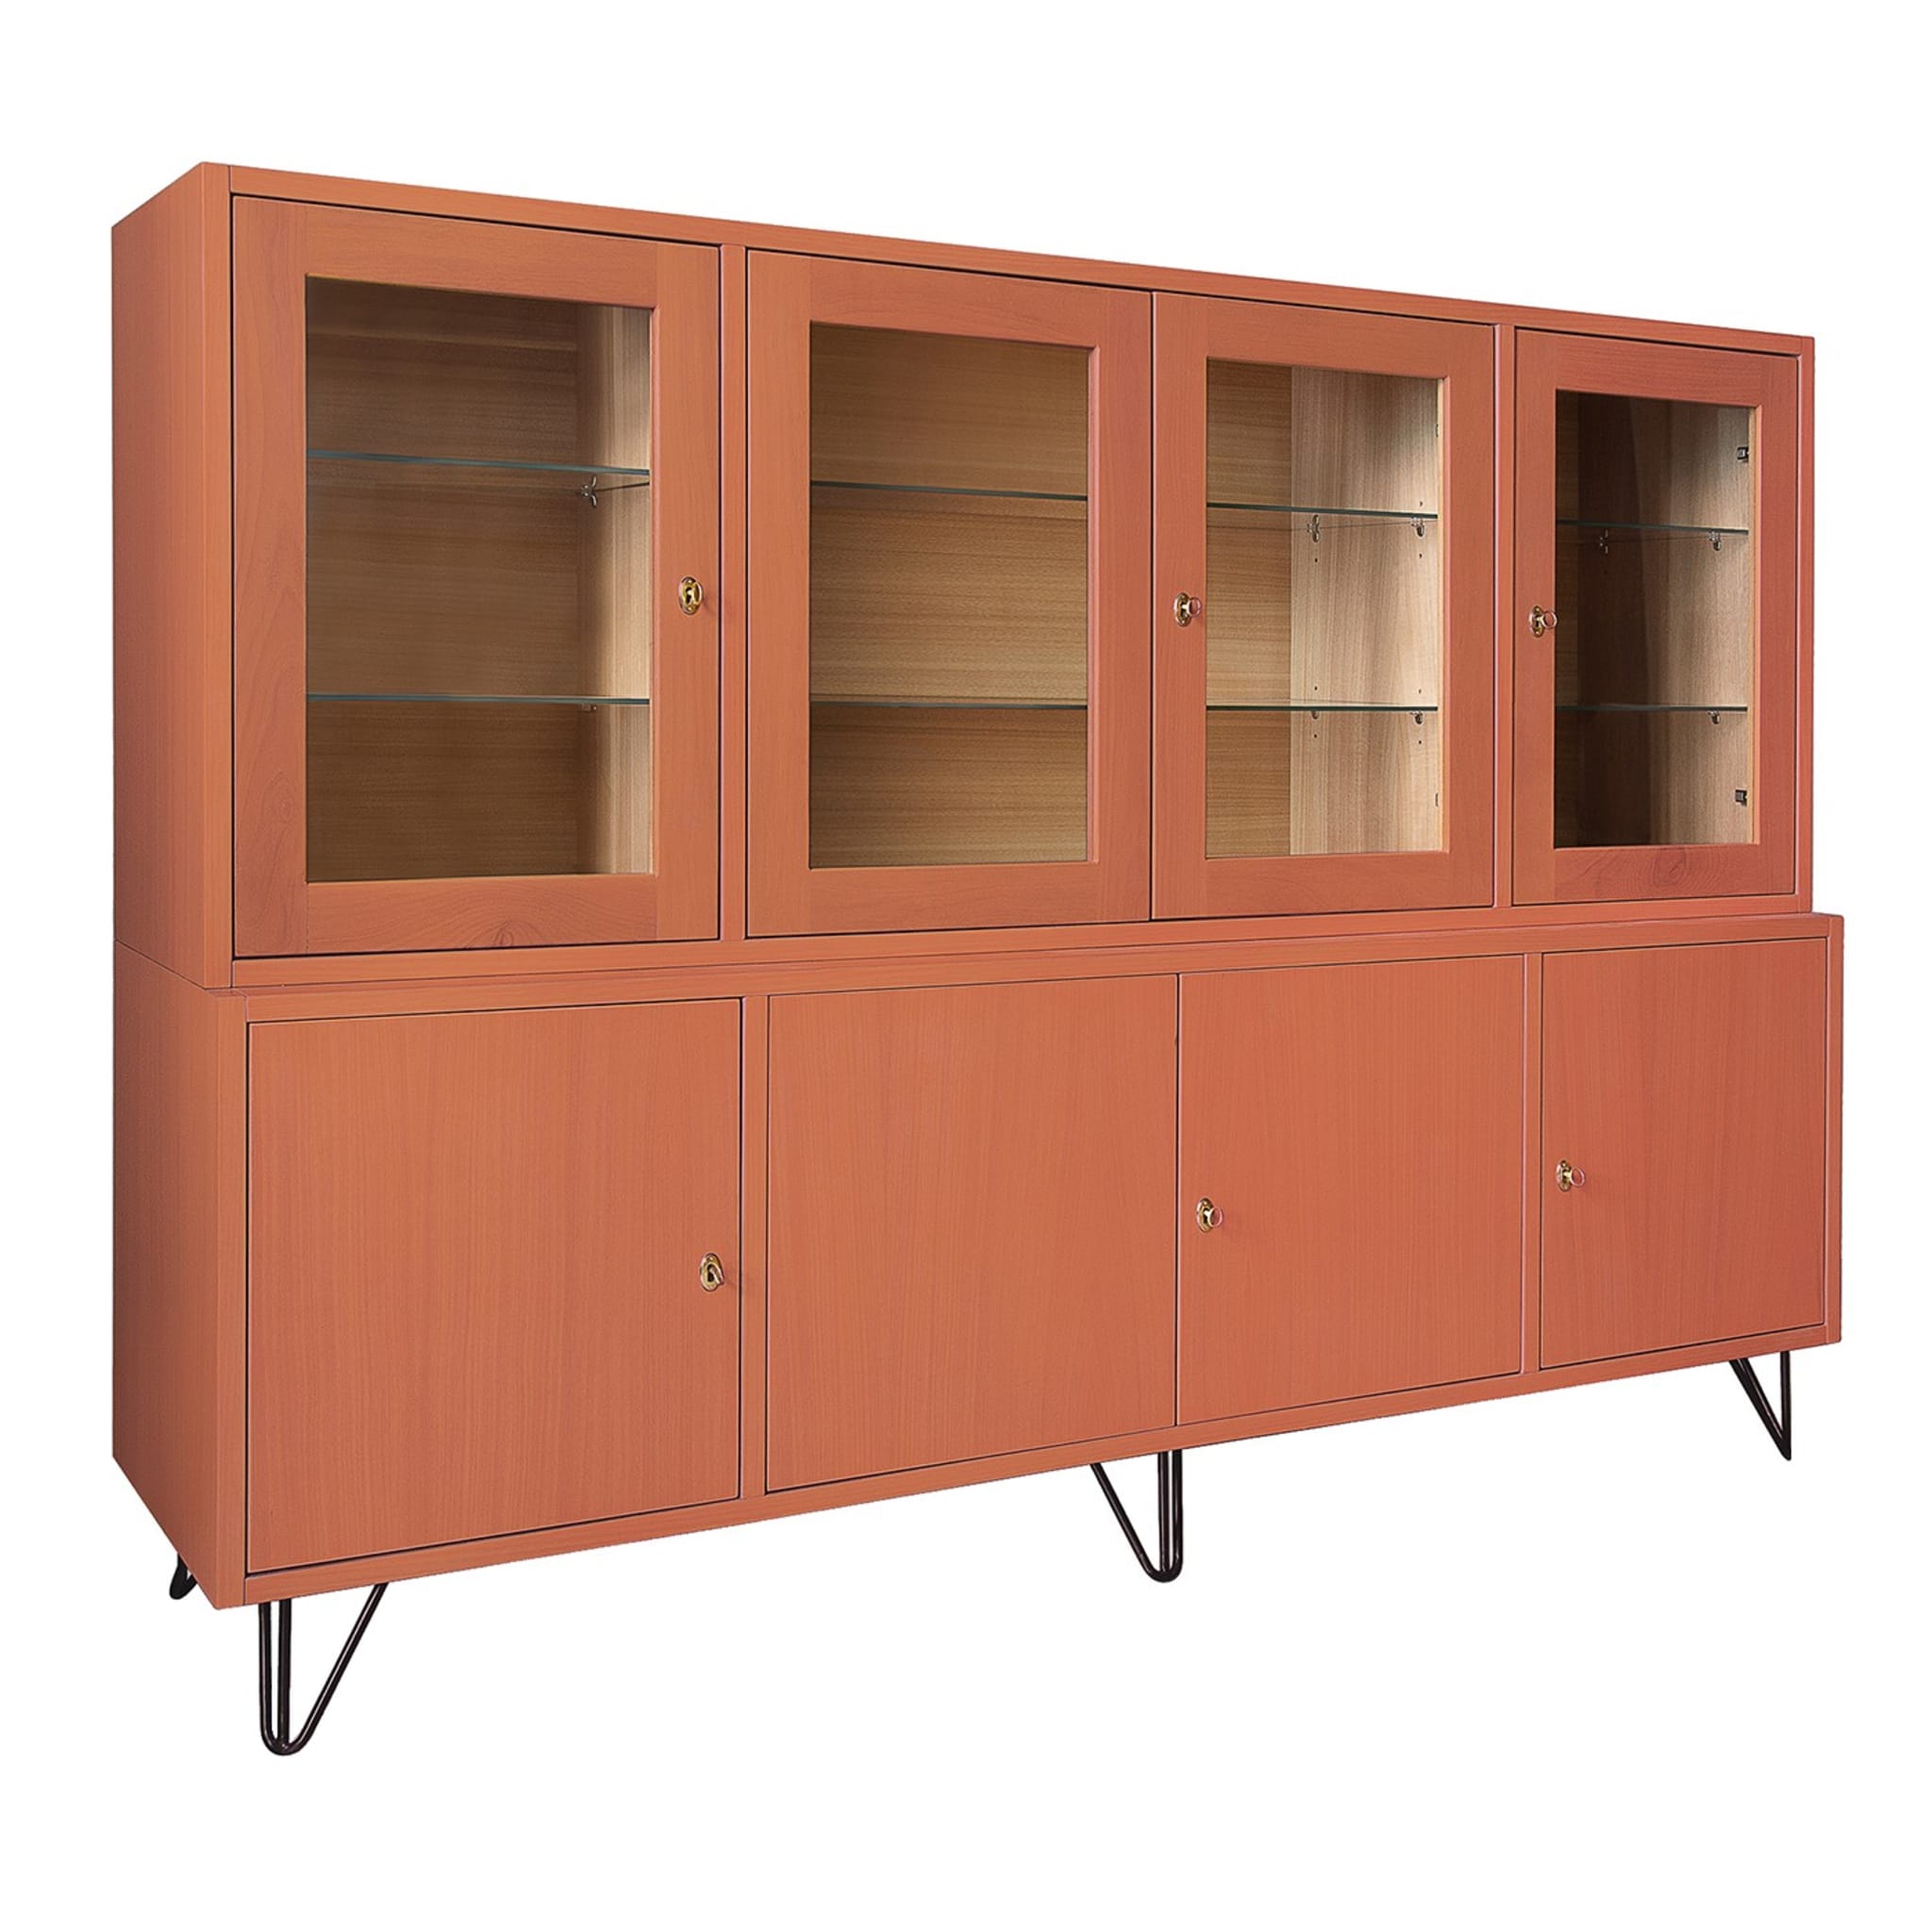 Eroica Brown Cabinet by Eugenio Gambella - Main view